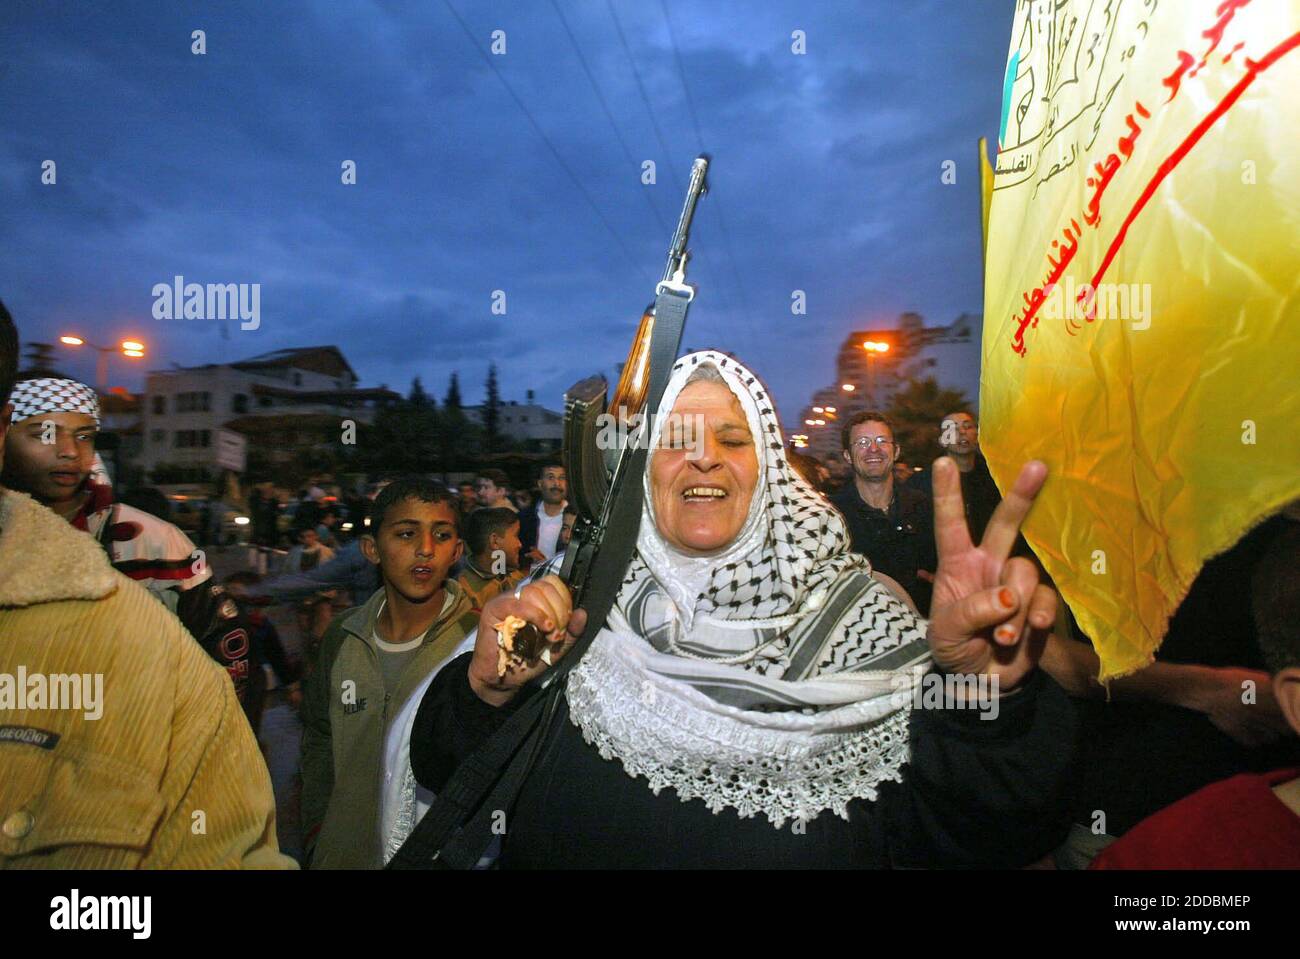 NO FILM, NO VIDEO, NO TV, NO DOCUMENTARY - A Palestinian woman from Fatah holds up gun, and chants slogans during a protest in front of president house Mahmoud Abbas, during a protest in Gaza City, Saturday, January 28, 2006. Fatah gunmen and Palestinian police, angry at Hamas's election victory, briefly took over parliament buildings in the West Bank and Gaza Strip on Saturday, firing in the air, witnesses said. Photo by Ahmad Khateib/Flash 90/KRT/ABACAPRESS.COM Stock Photo